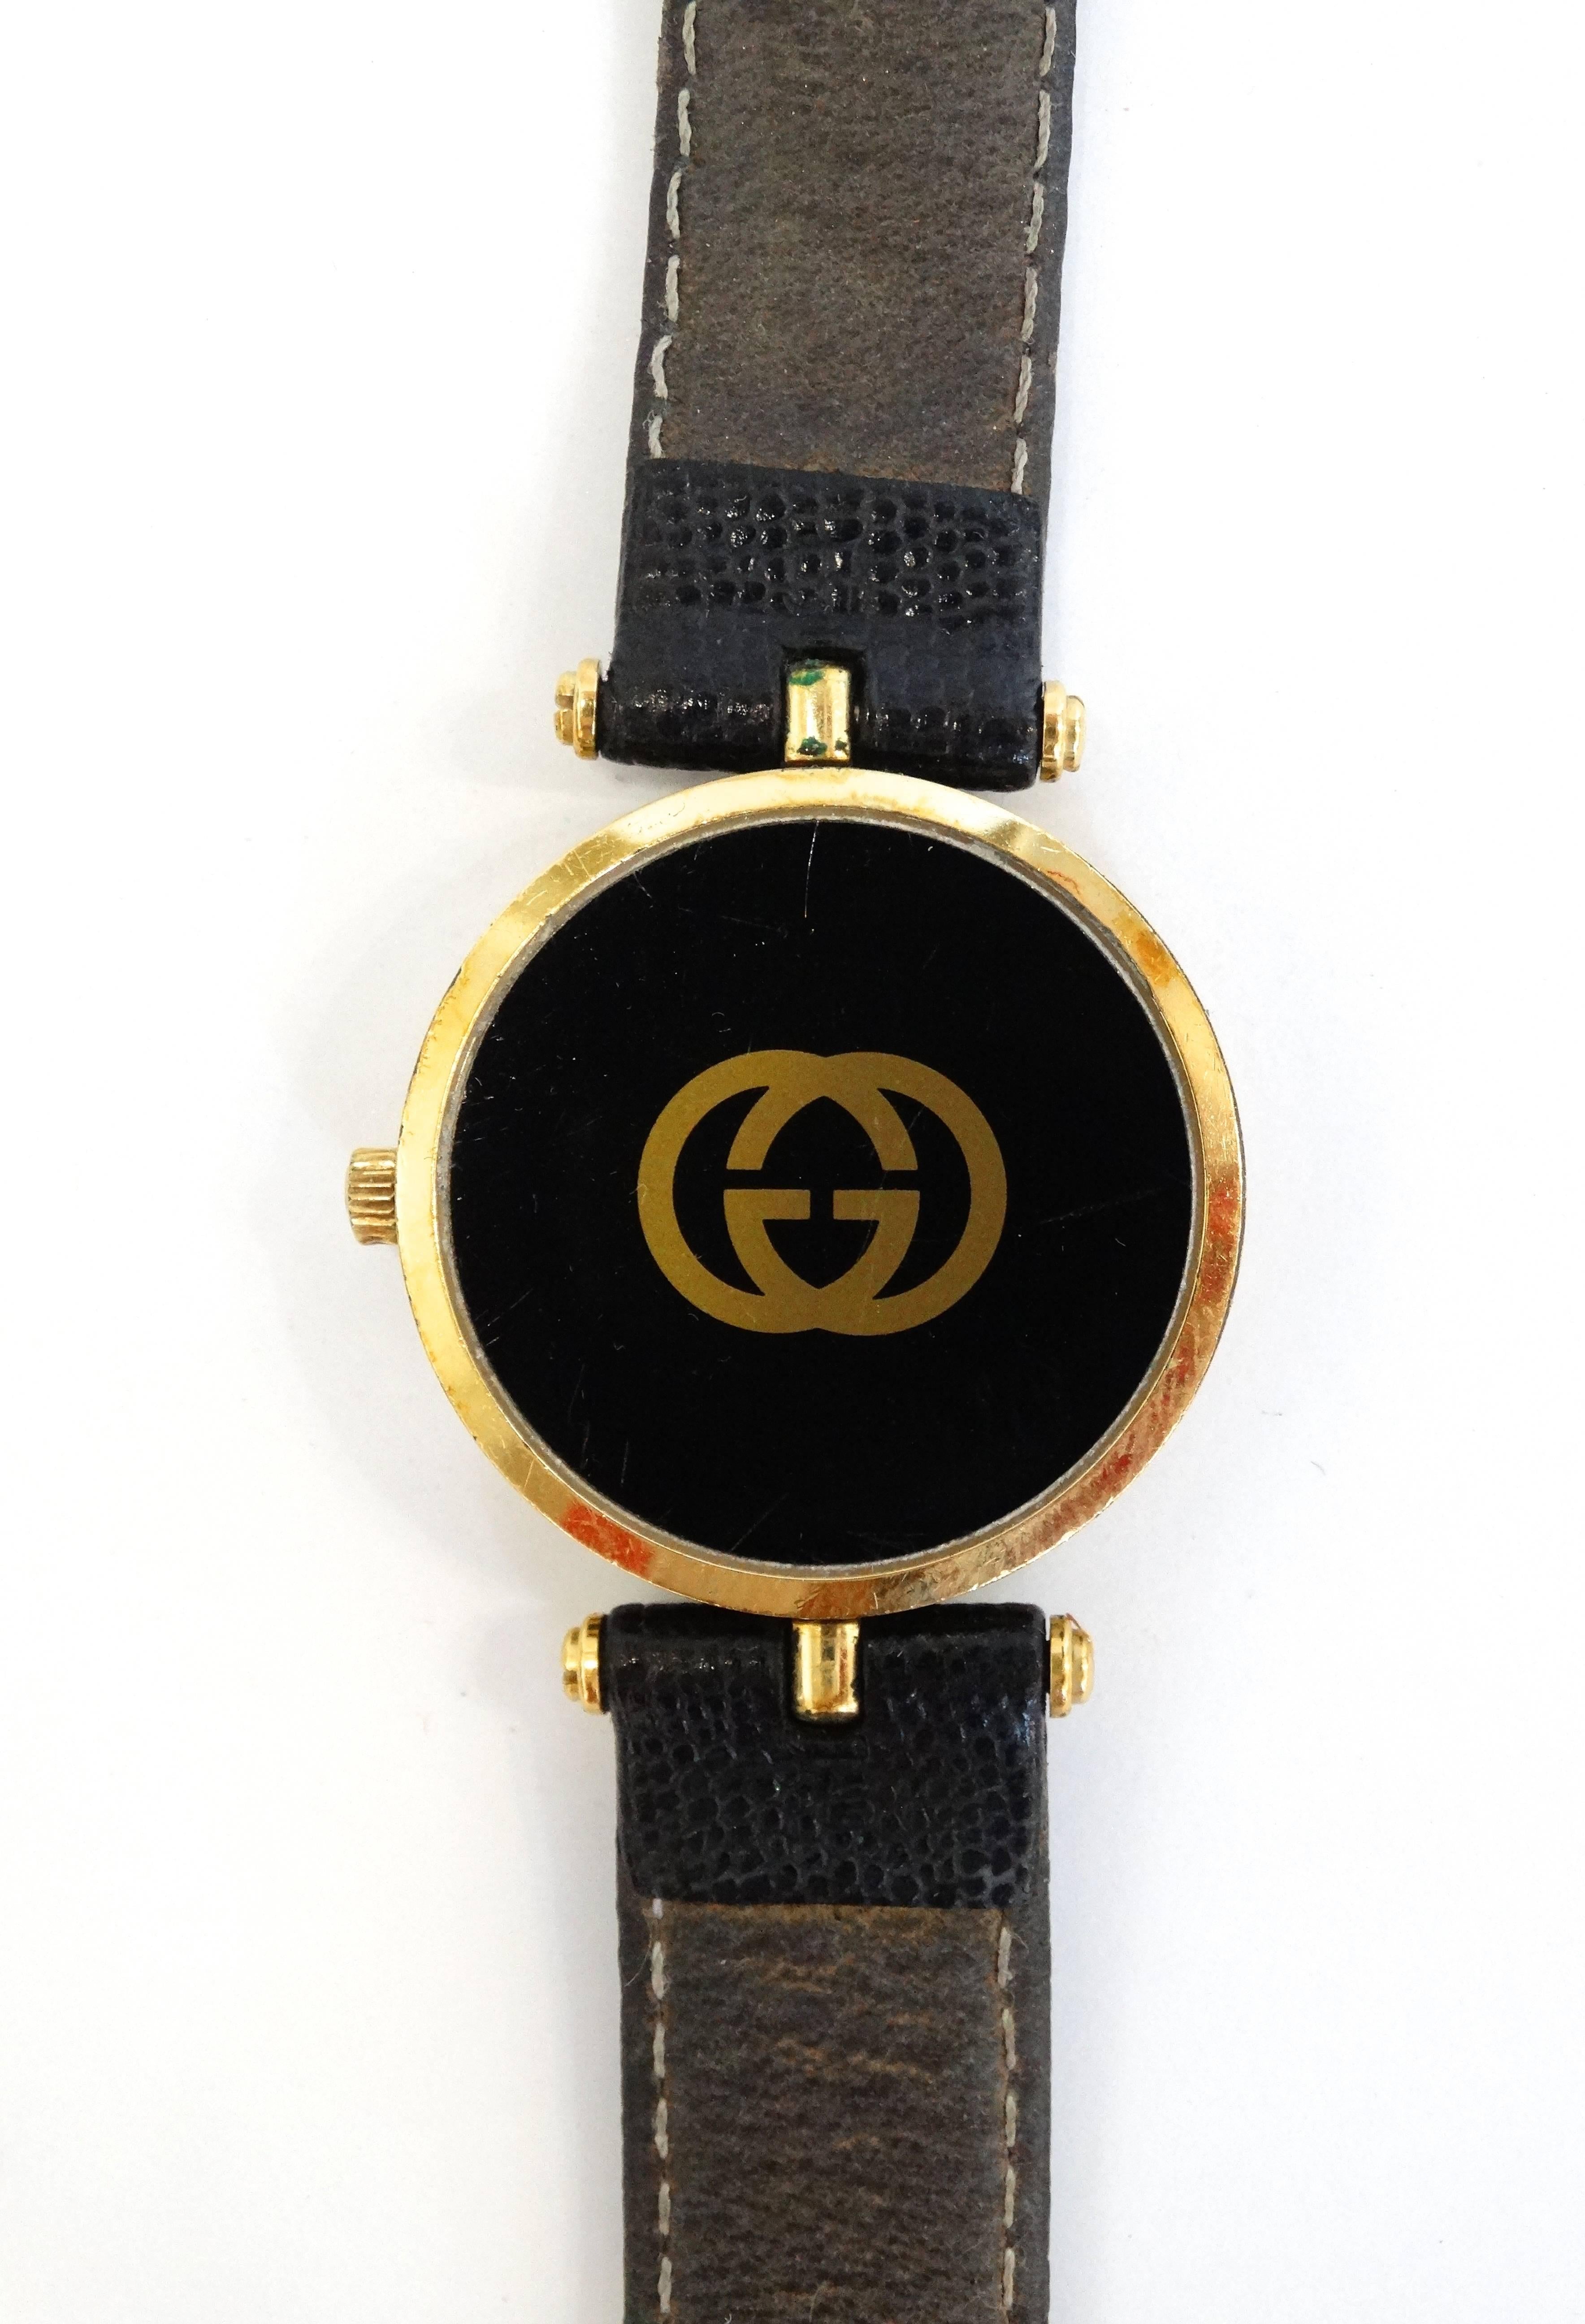 1980s watch from the iconic brand Gucci! Solid black with gold roman numerals on the face. Hardware cast in gold metal accented with black enamel stripes on the side. Buckle embossed with the classic GG logo, signed with Gucci on the back. Black